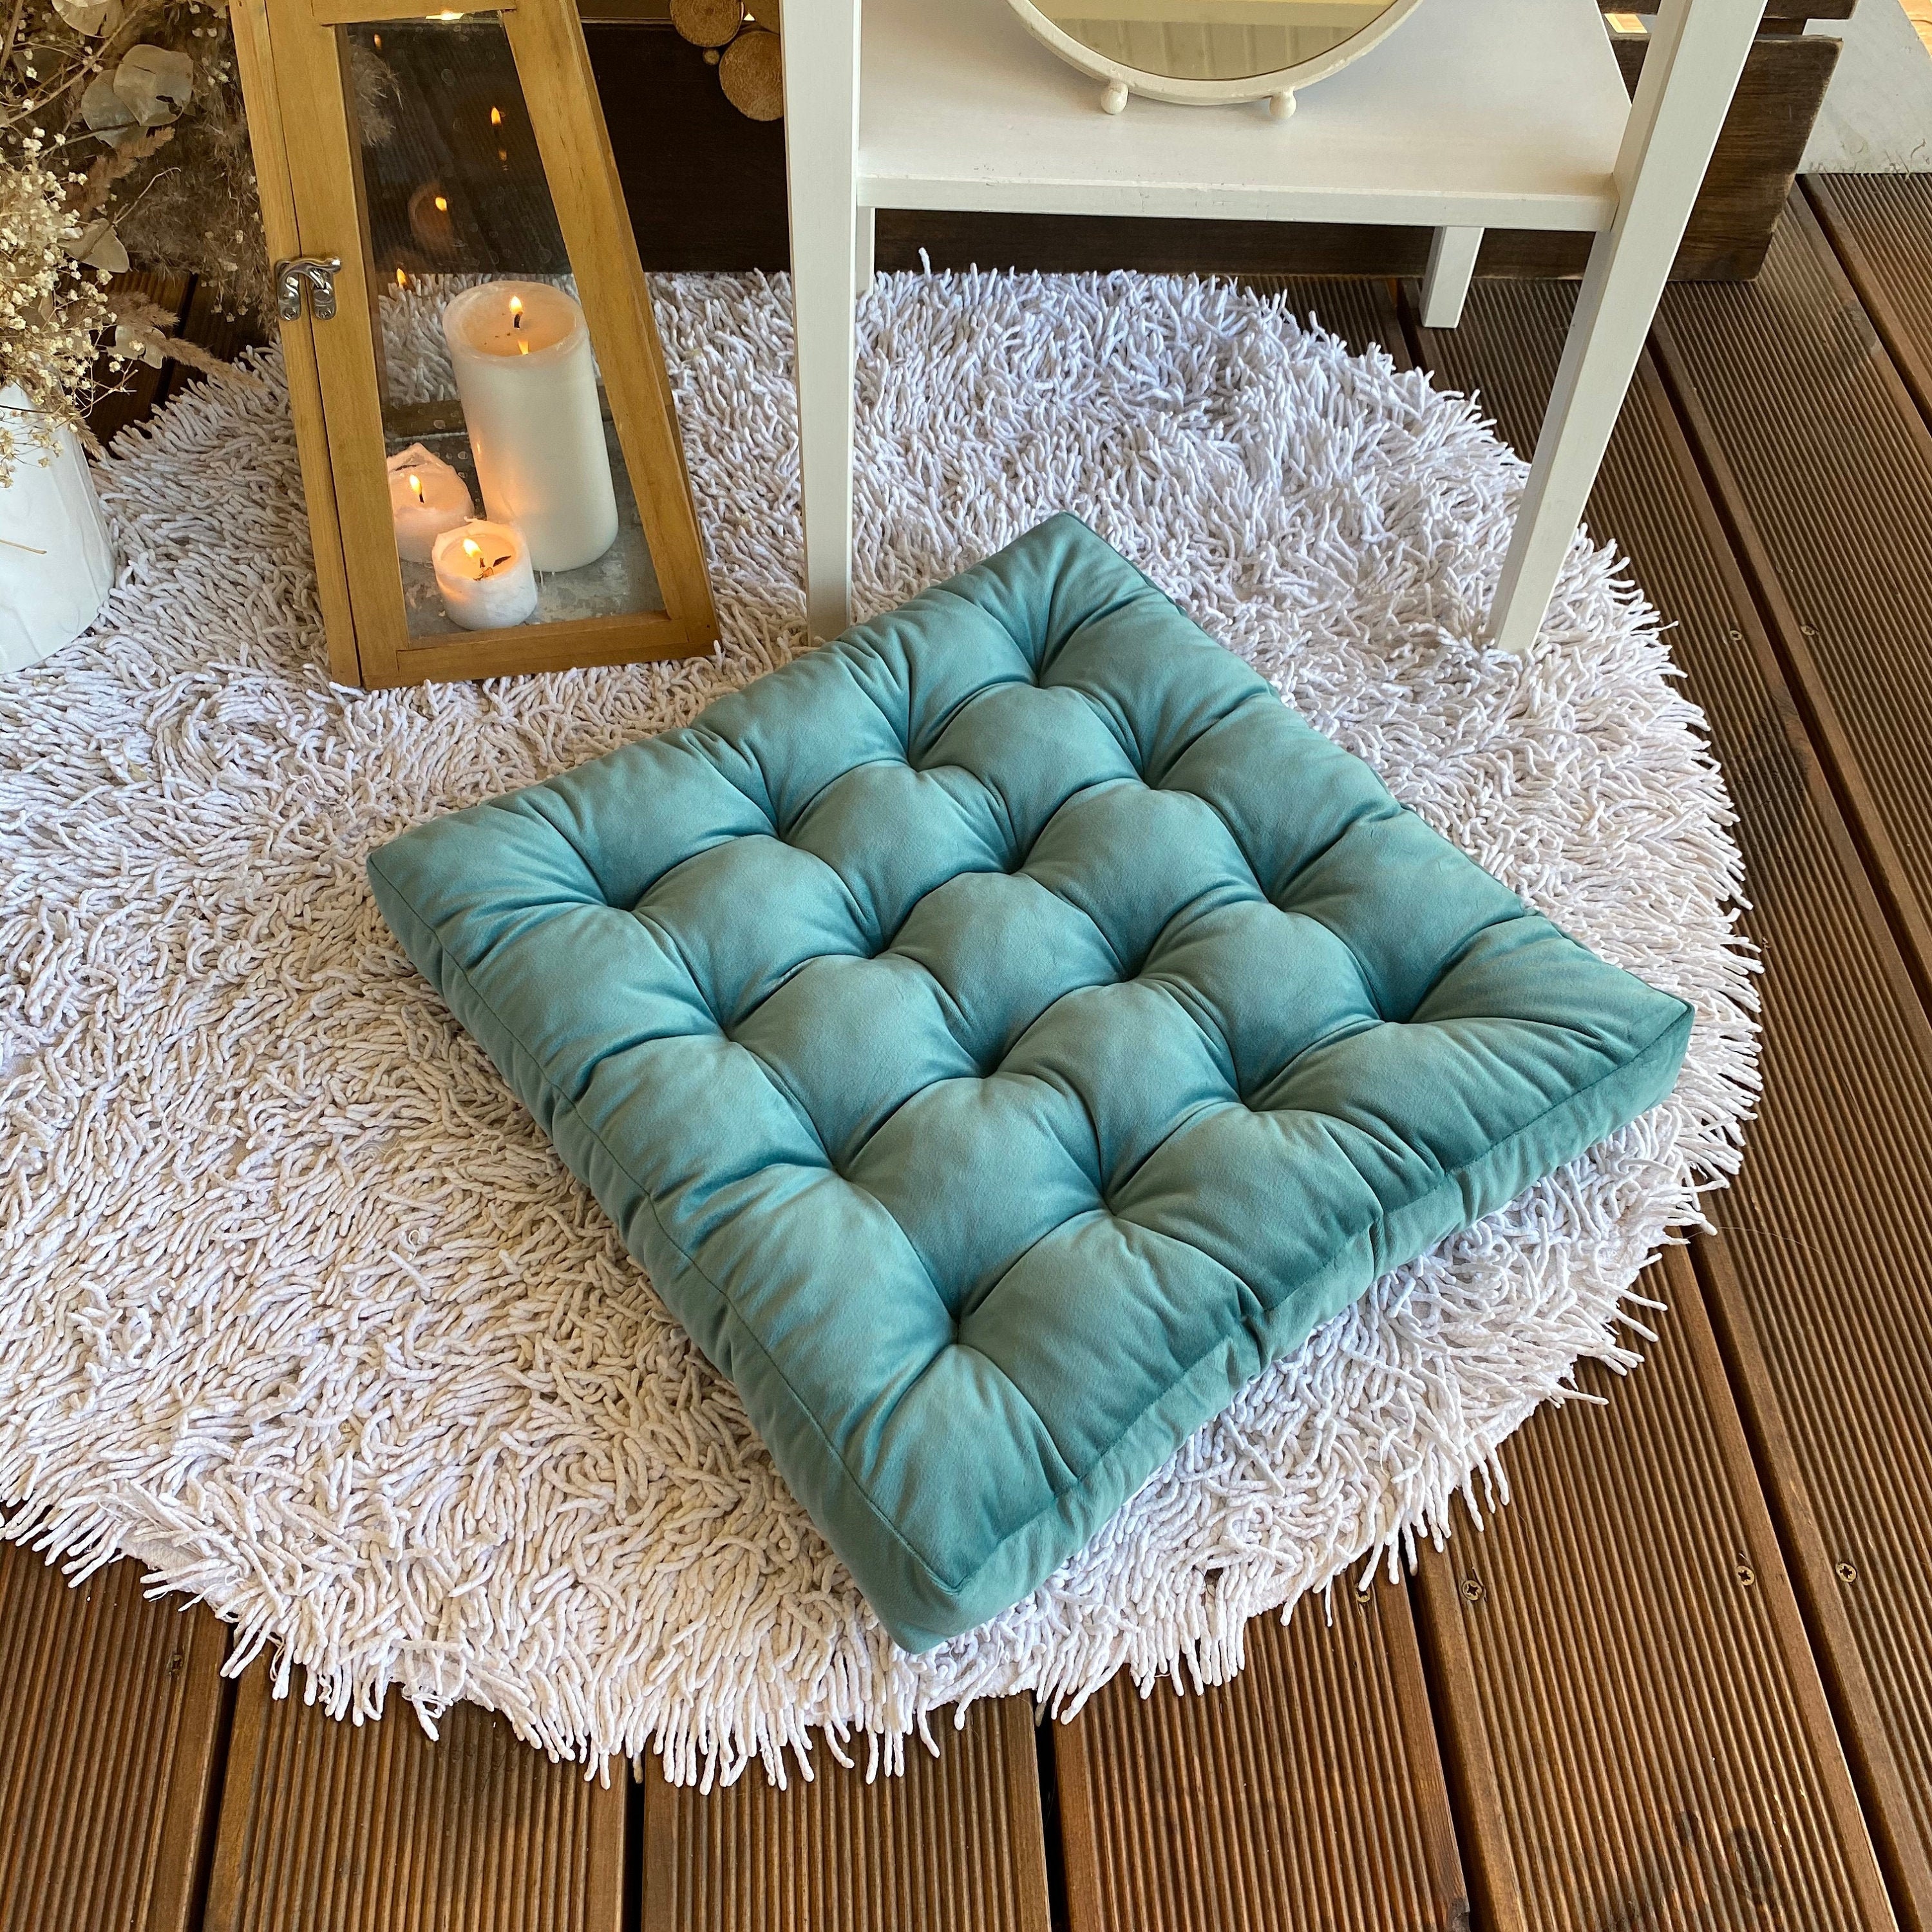 Square Solid Color Cushion Soft Hot selling 40x40cm Thicken Seat